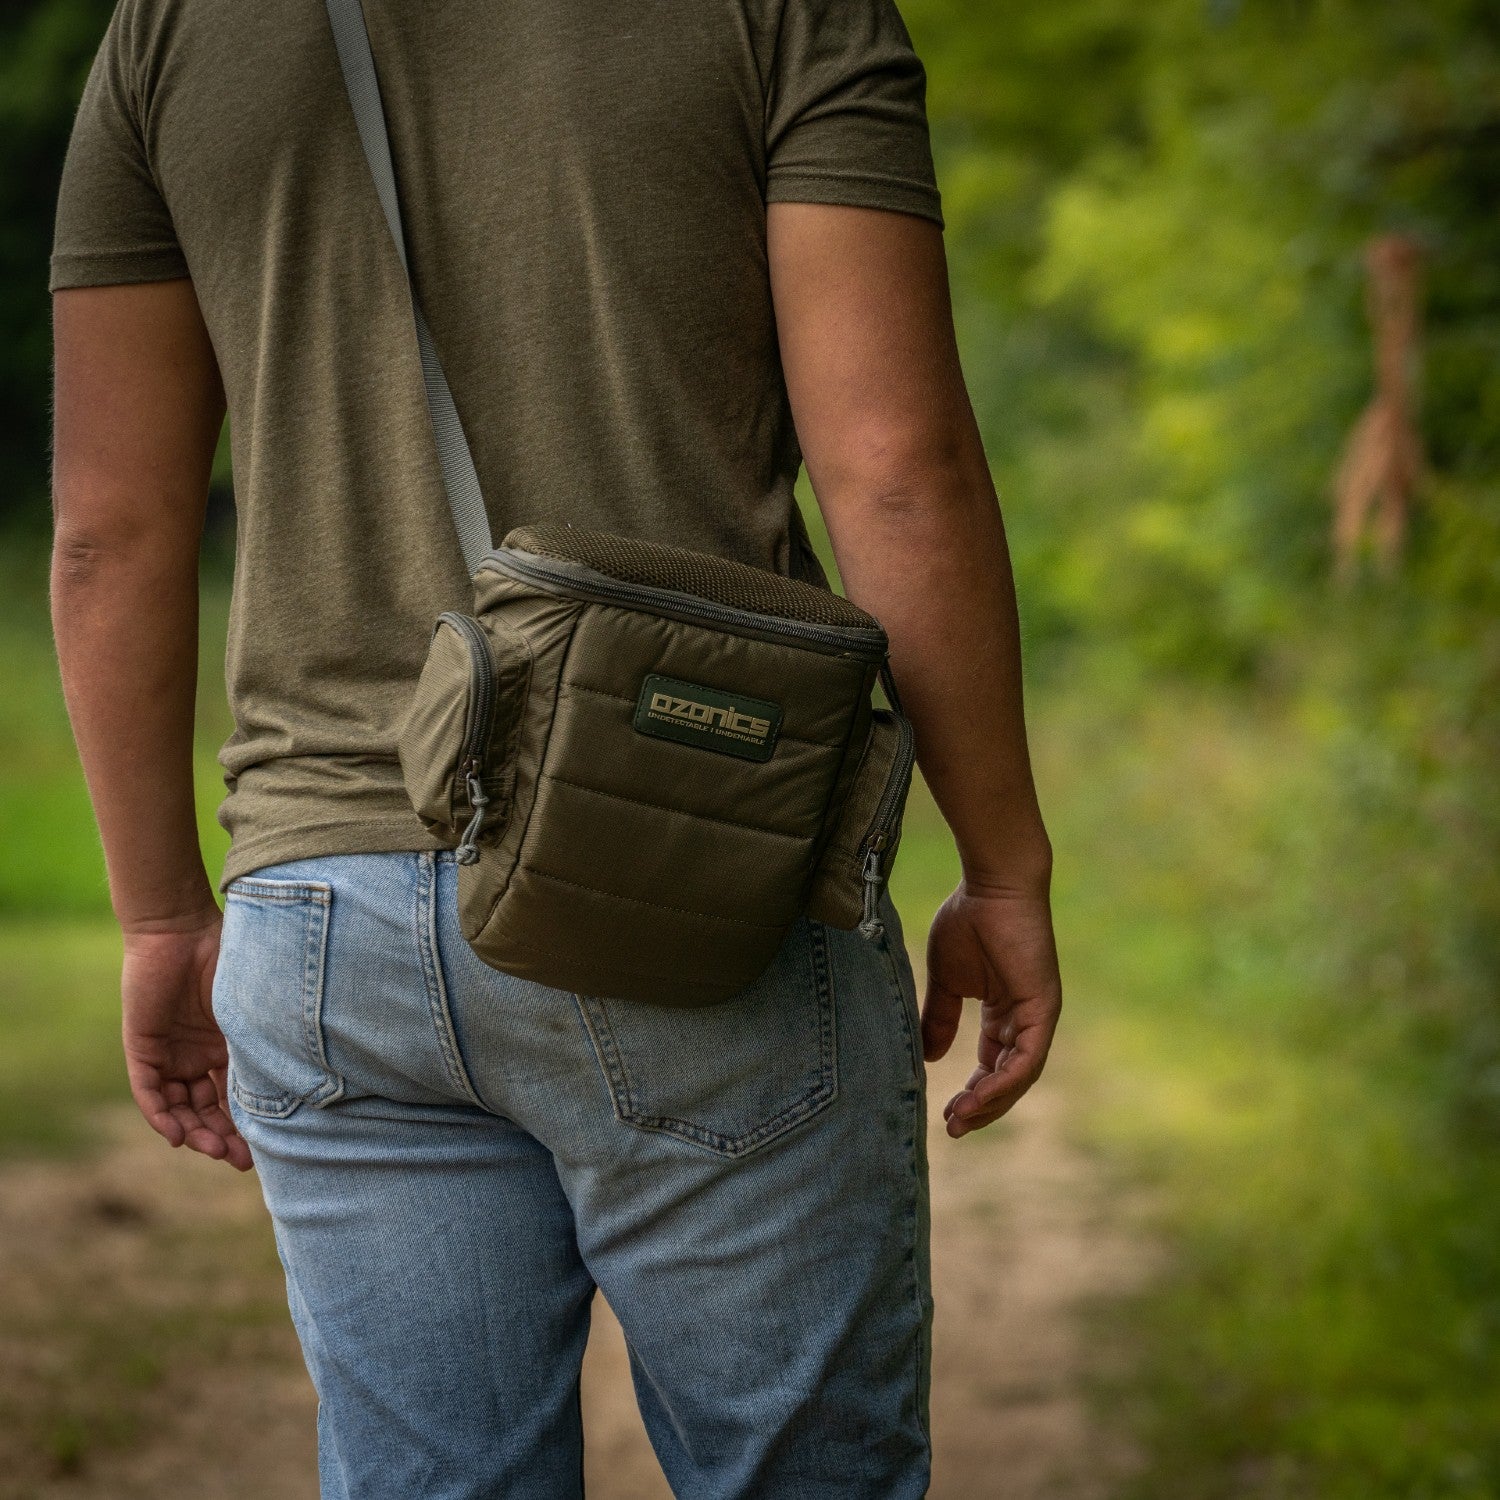 A Man Holding The Bag On His Shoulder On A Dirt Road.